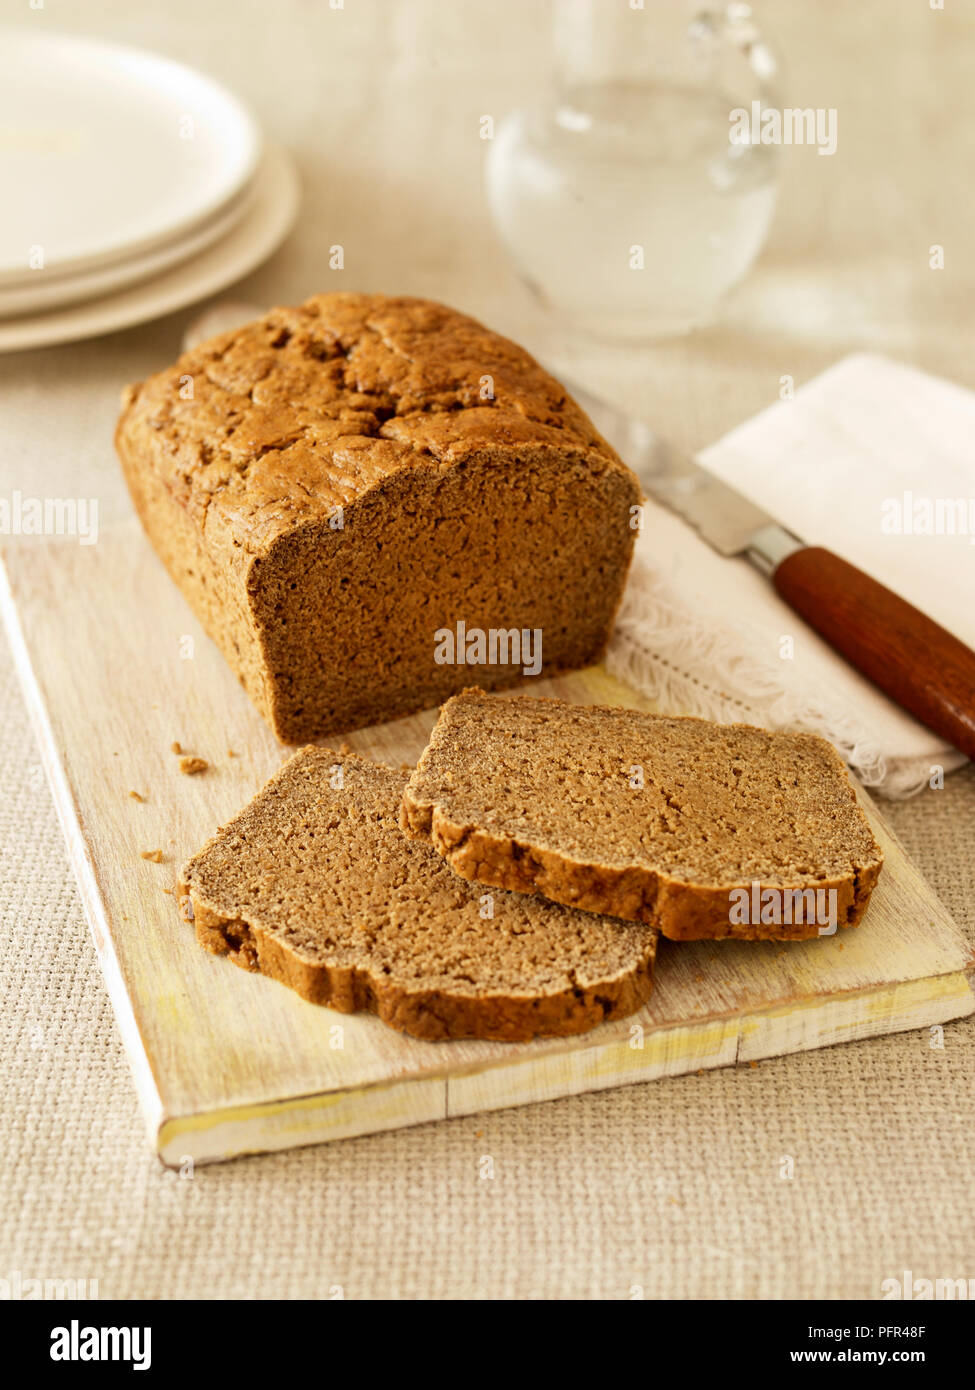 Gluten free basic brown loaf on chopping board with two slices and bread knife Stock Photo